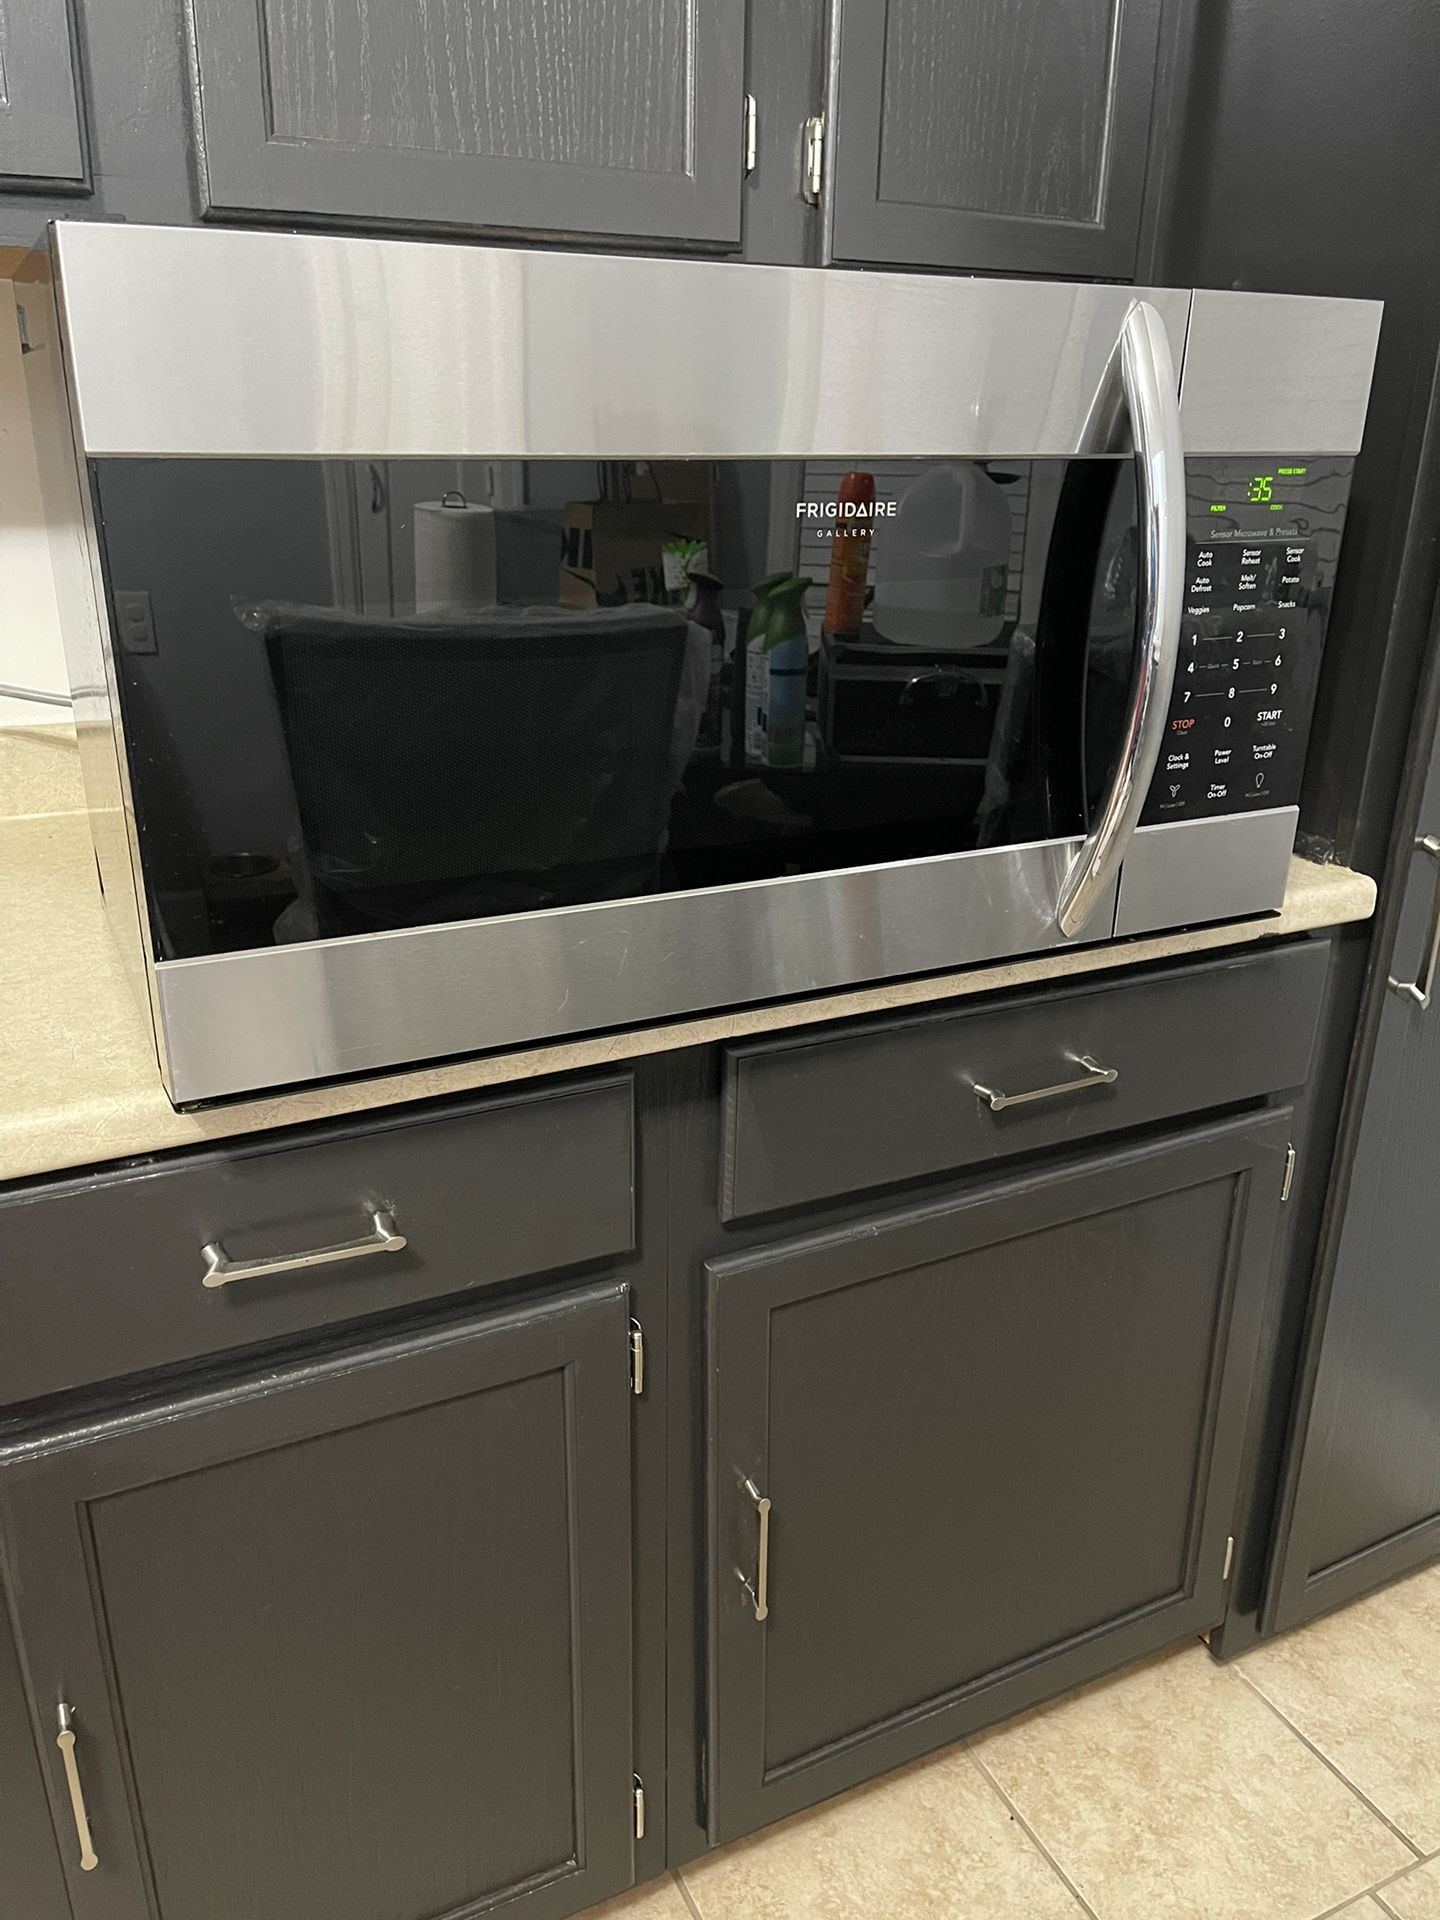 Over-the-Range Frigidaire Microwave 